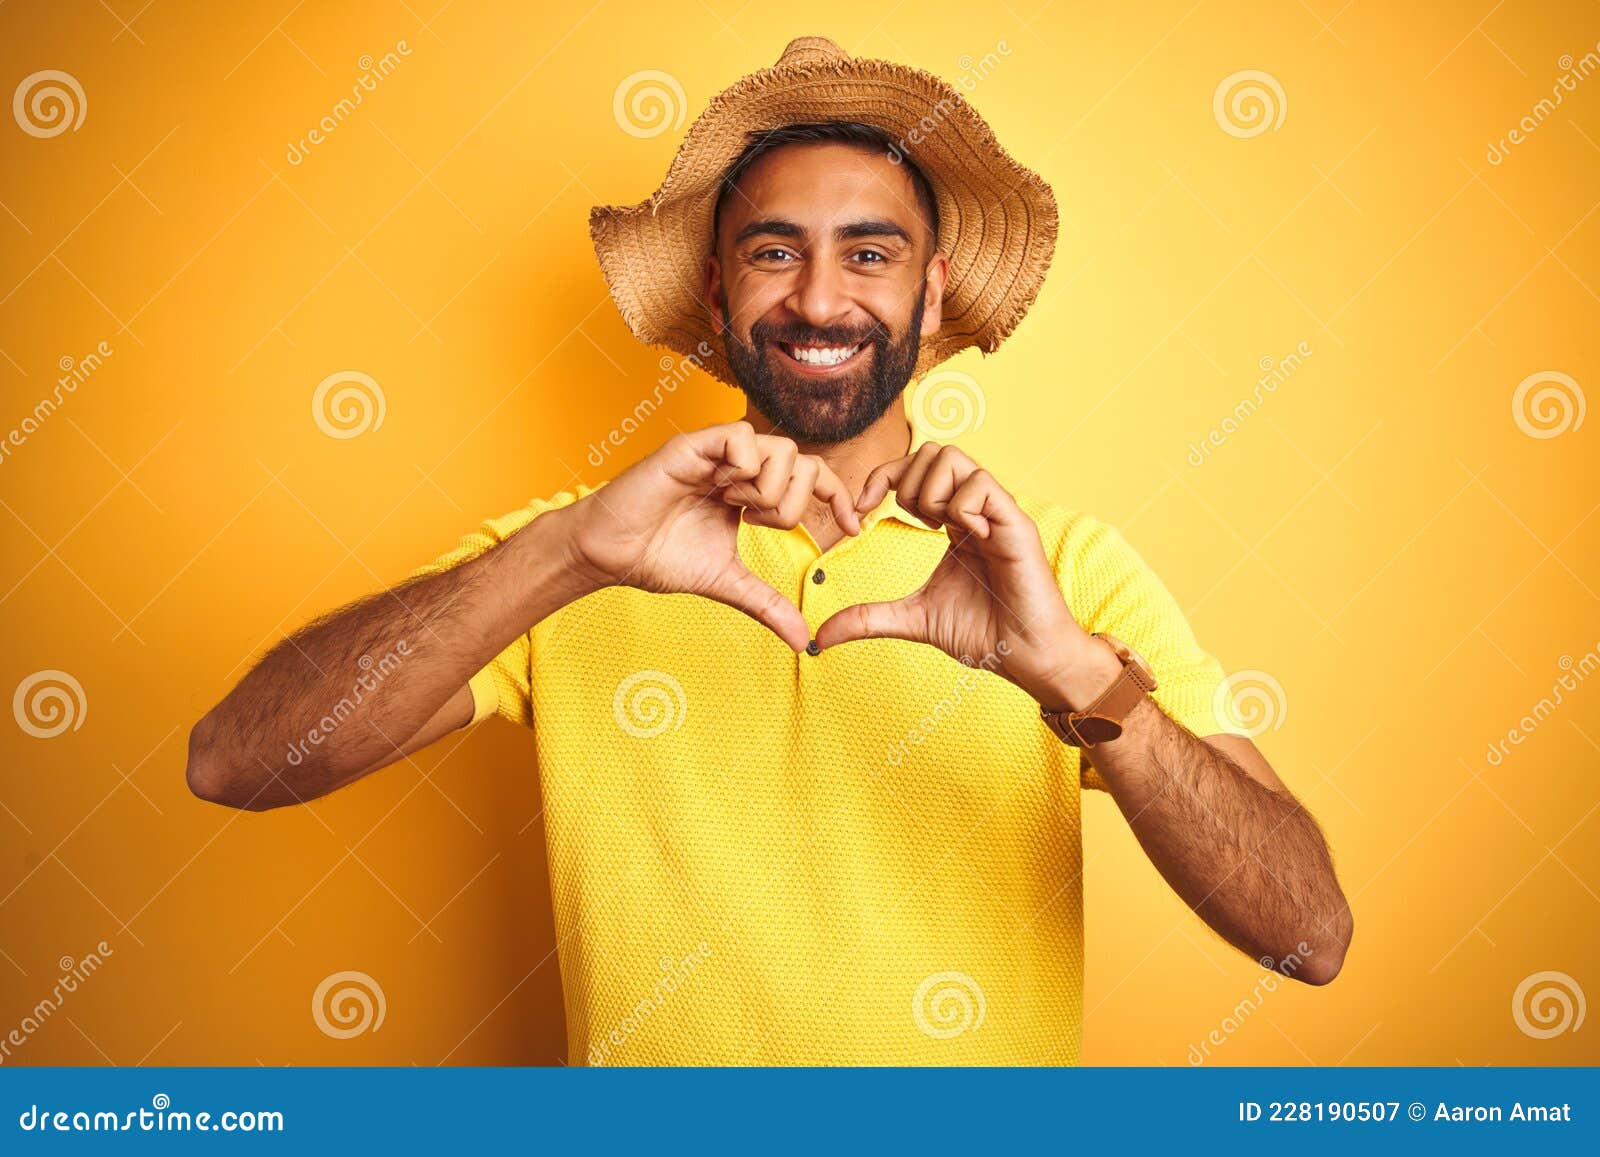 Young Indian Man on Vacation Wearing Summer Hat Standing Over Isolated Yellow Background Smiling Showing Heart Symbol and Stock Image - Image of hispanic, couple: 228190507